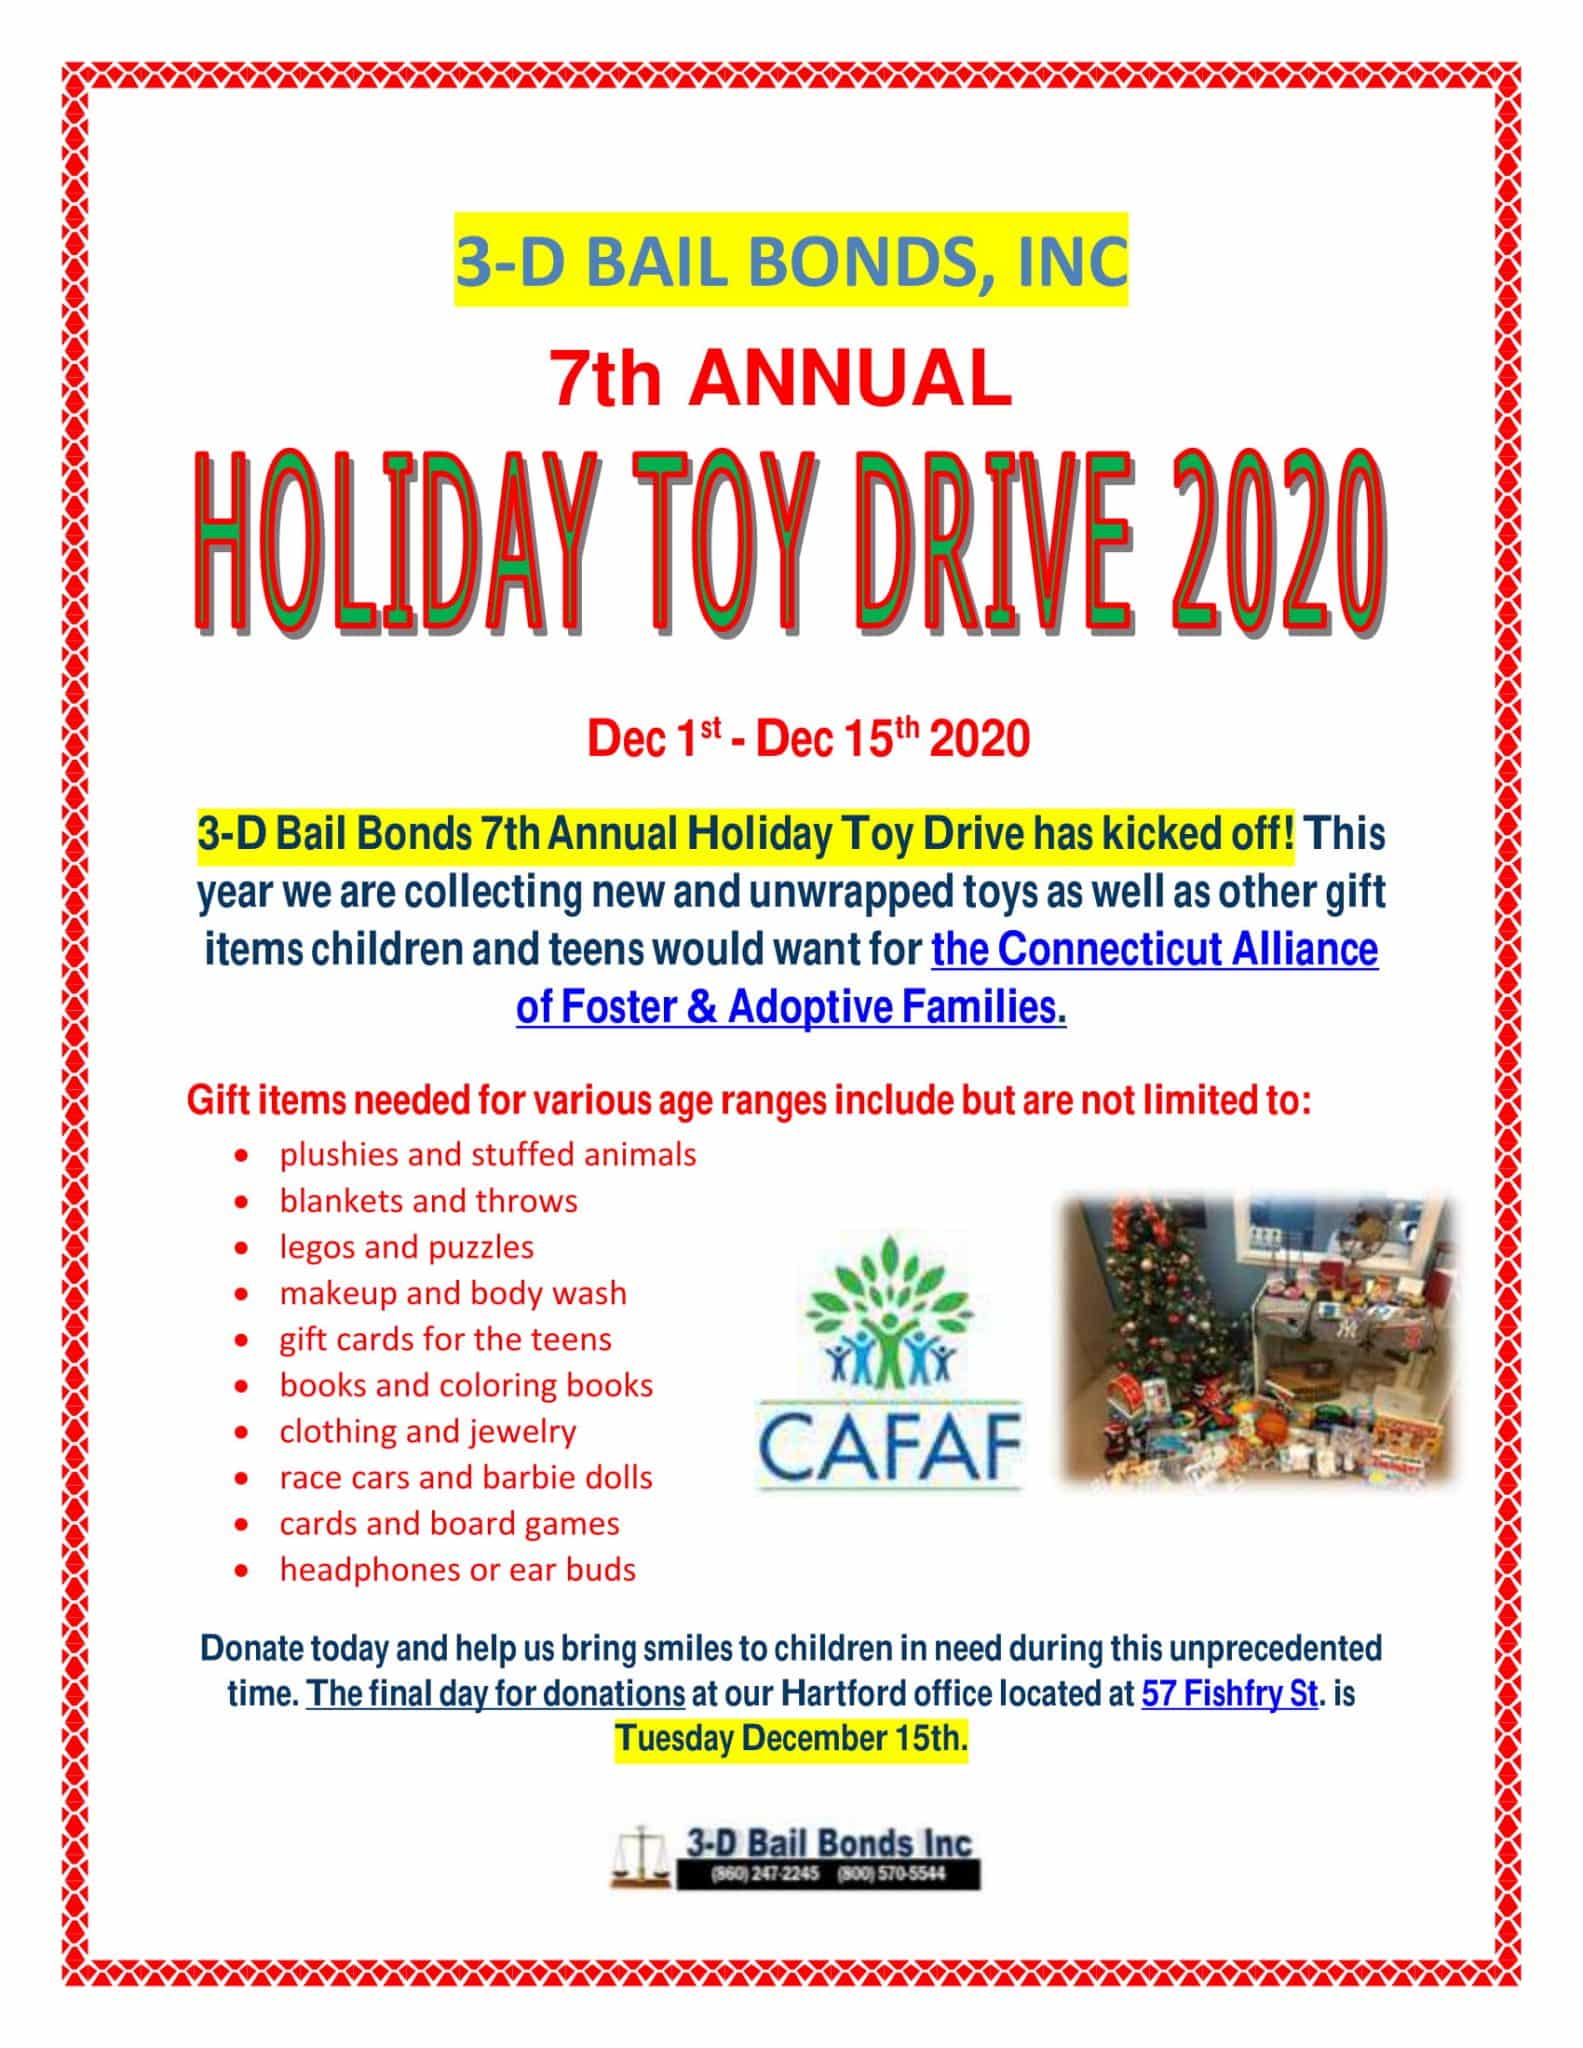 2020 Holiday Toy Drive Benefits Connecticut Foster Children